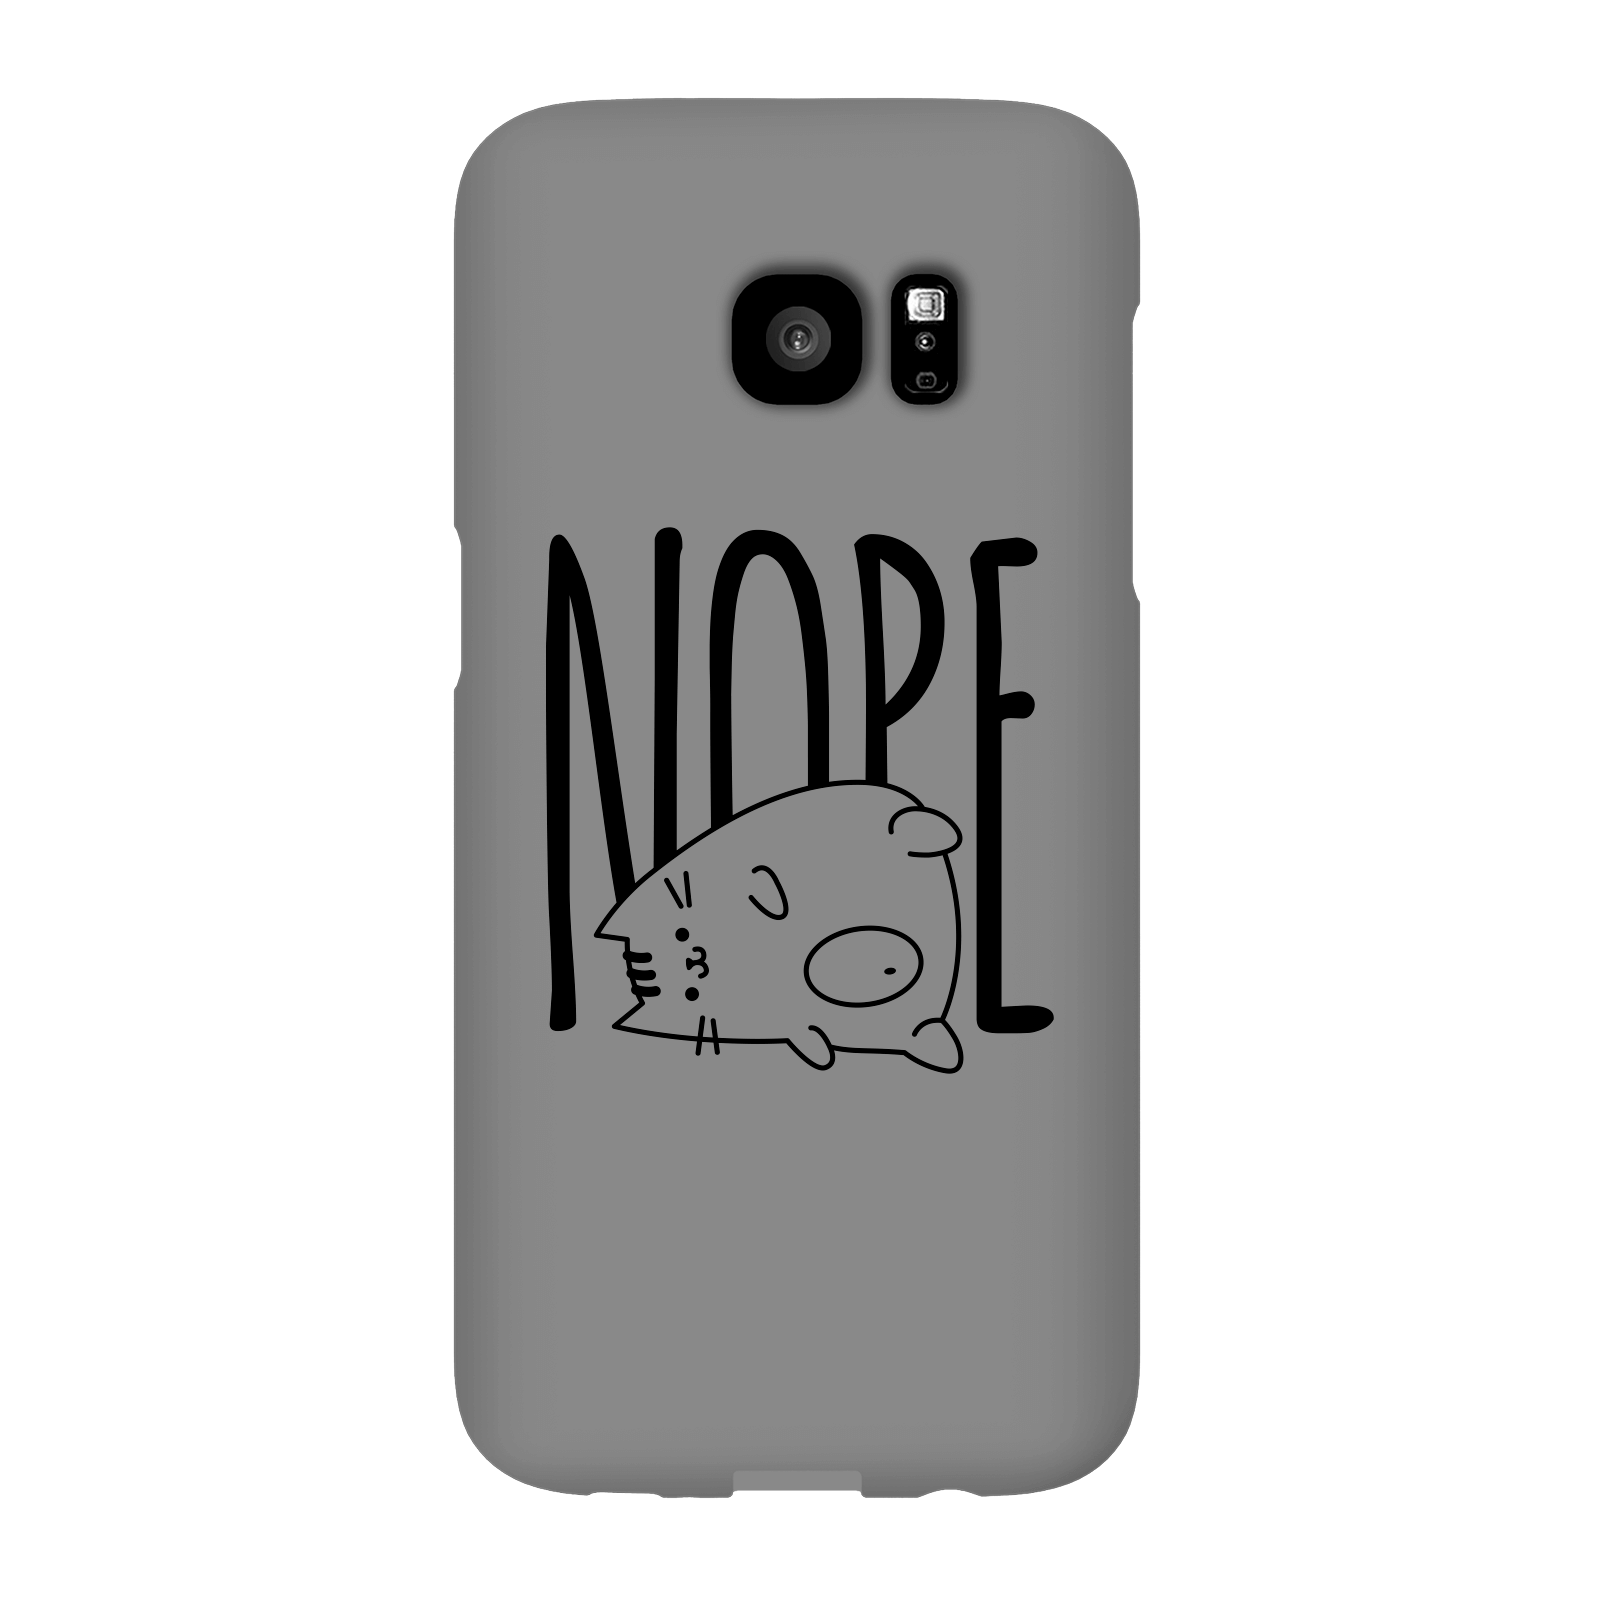 Nope Phone Case for iPhone and Android - Samsung S7 Edge - Snap Case - Gloss